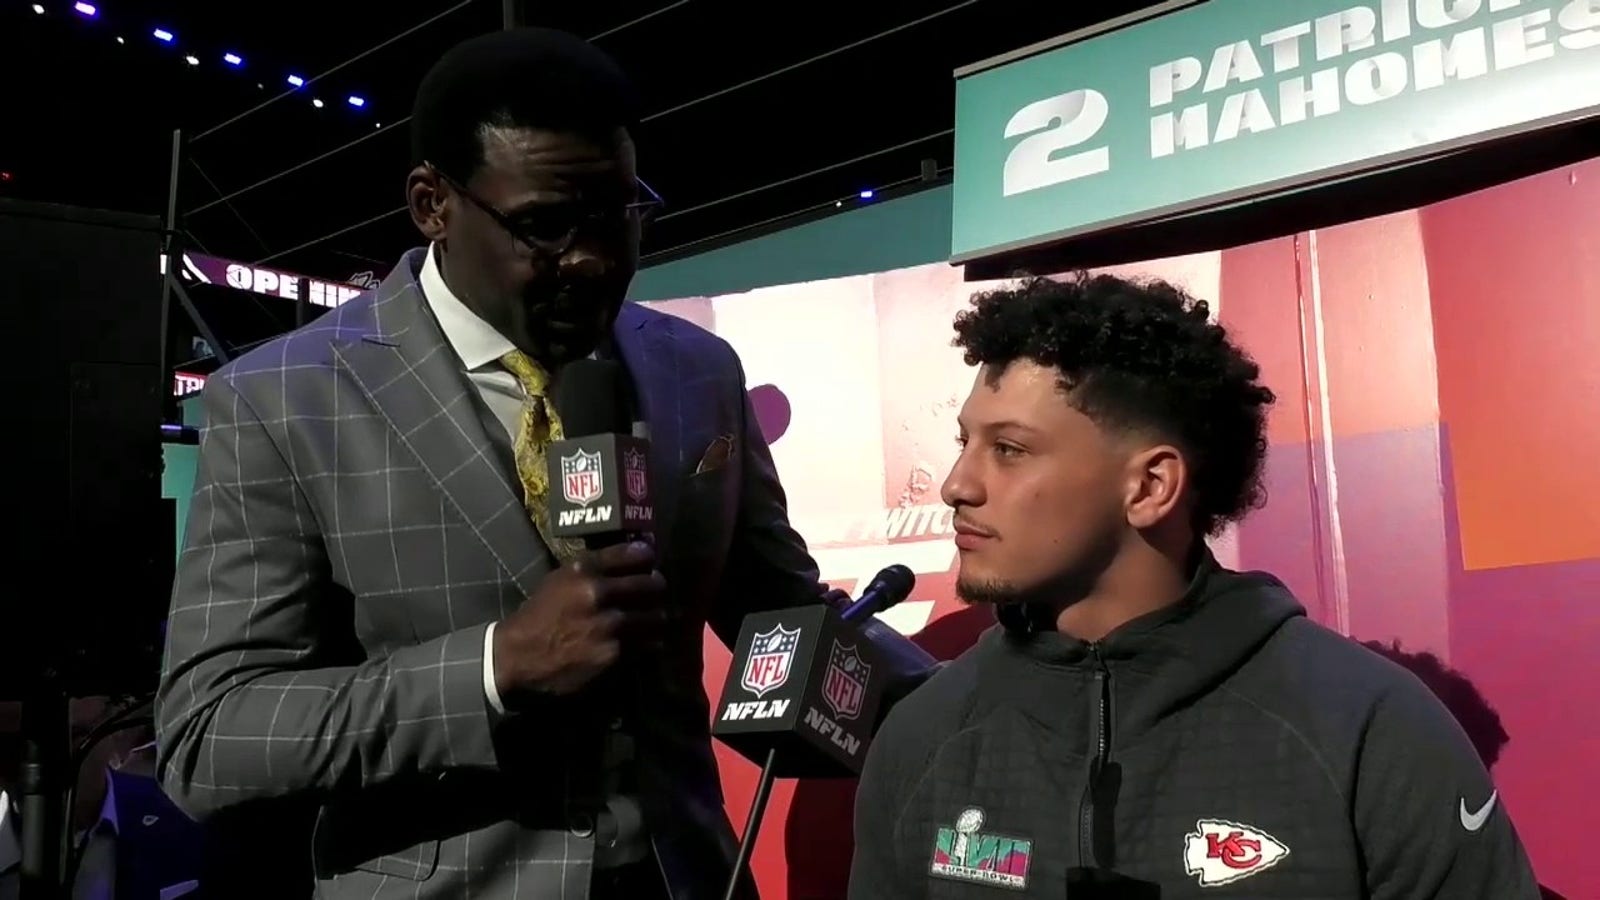 Patrick Mahomes on preparing for the Super Bowl, the impact of winning another title and more